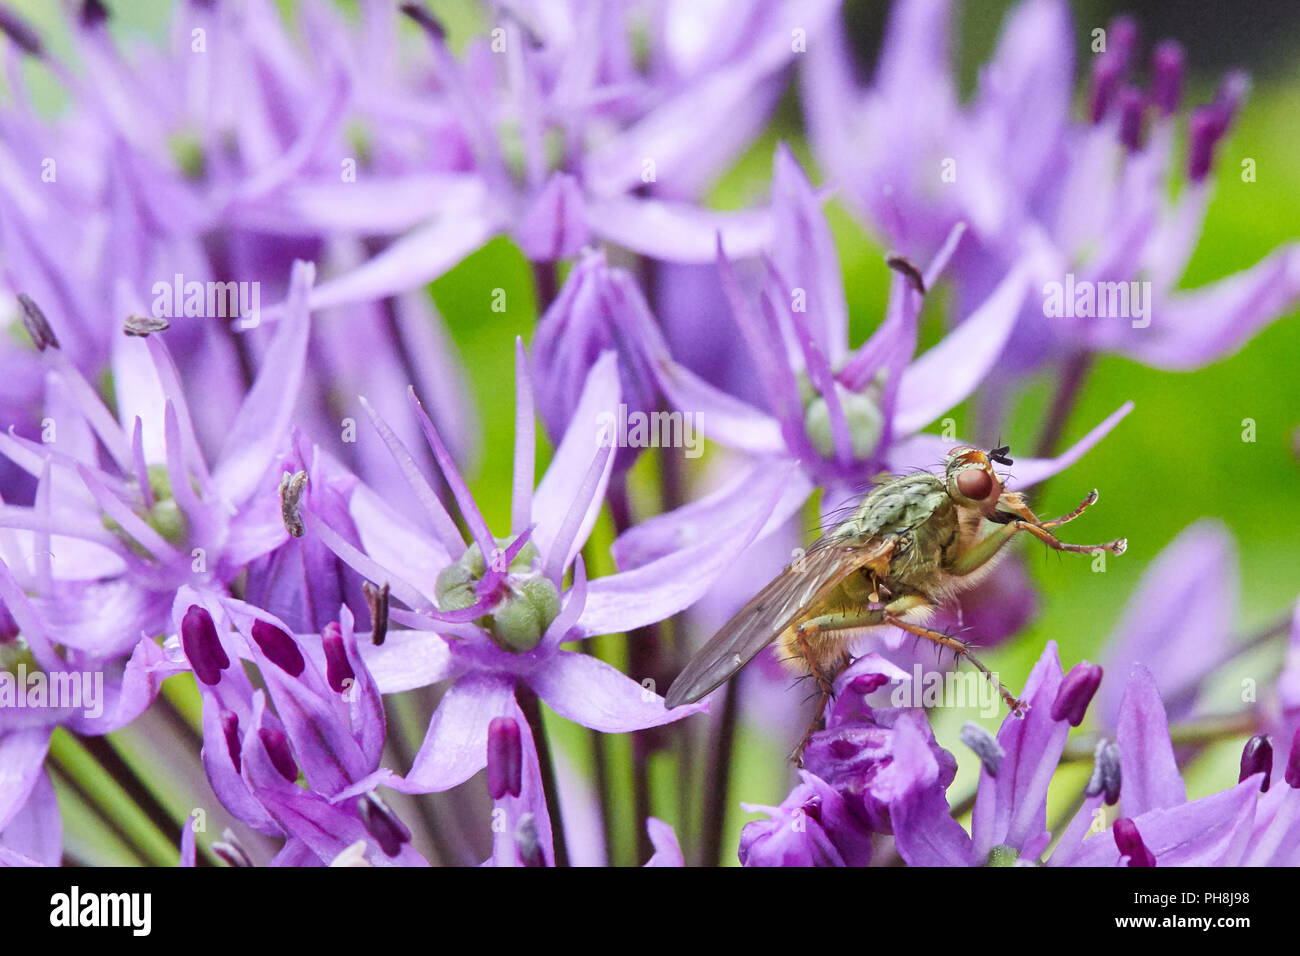 Macro photo of ugly green hairy large adult cabbage root fly sitting on the violet blossom of an allium in the garden Stock Photo